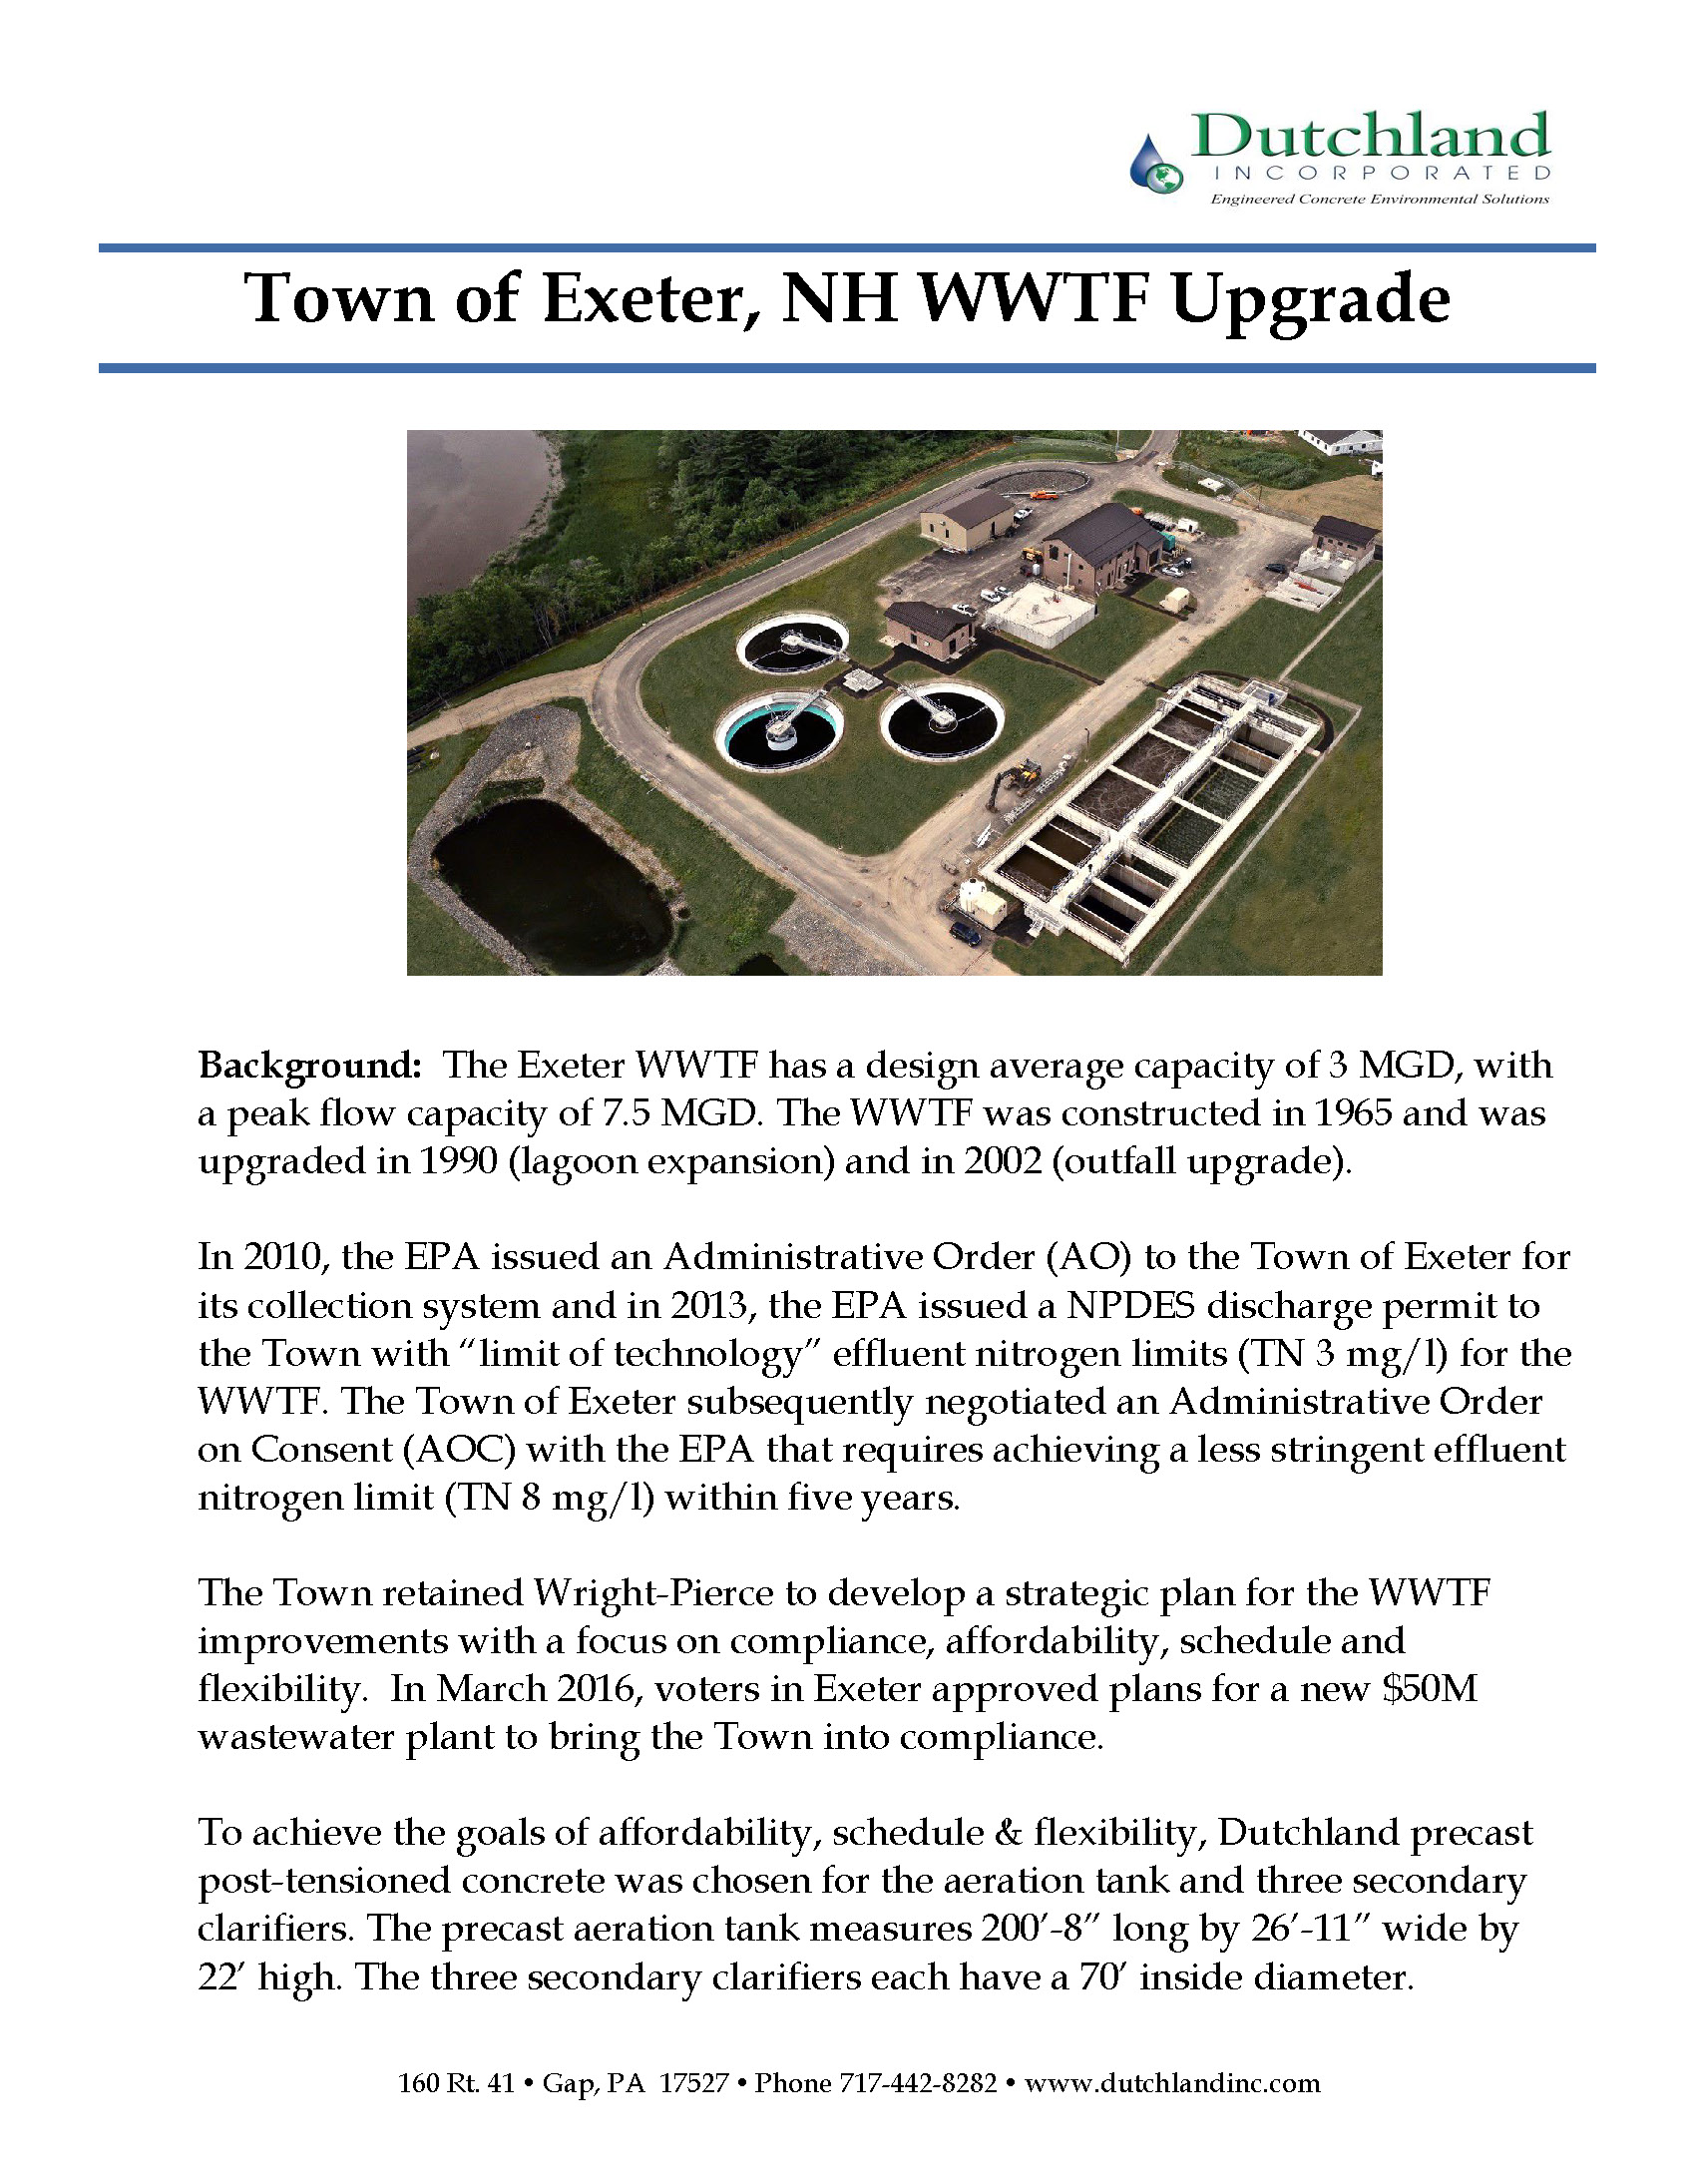 exeter wwtp case study